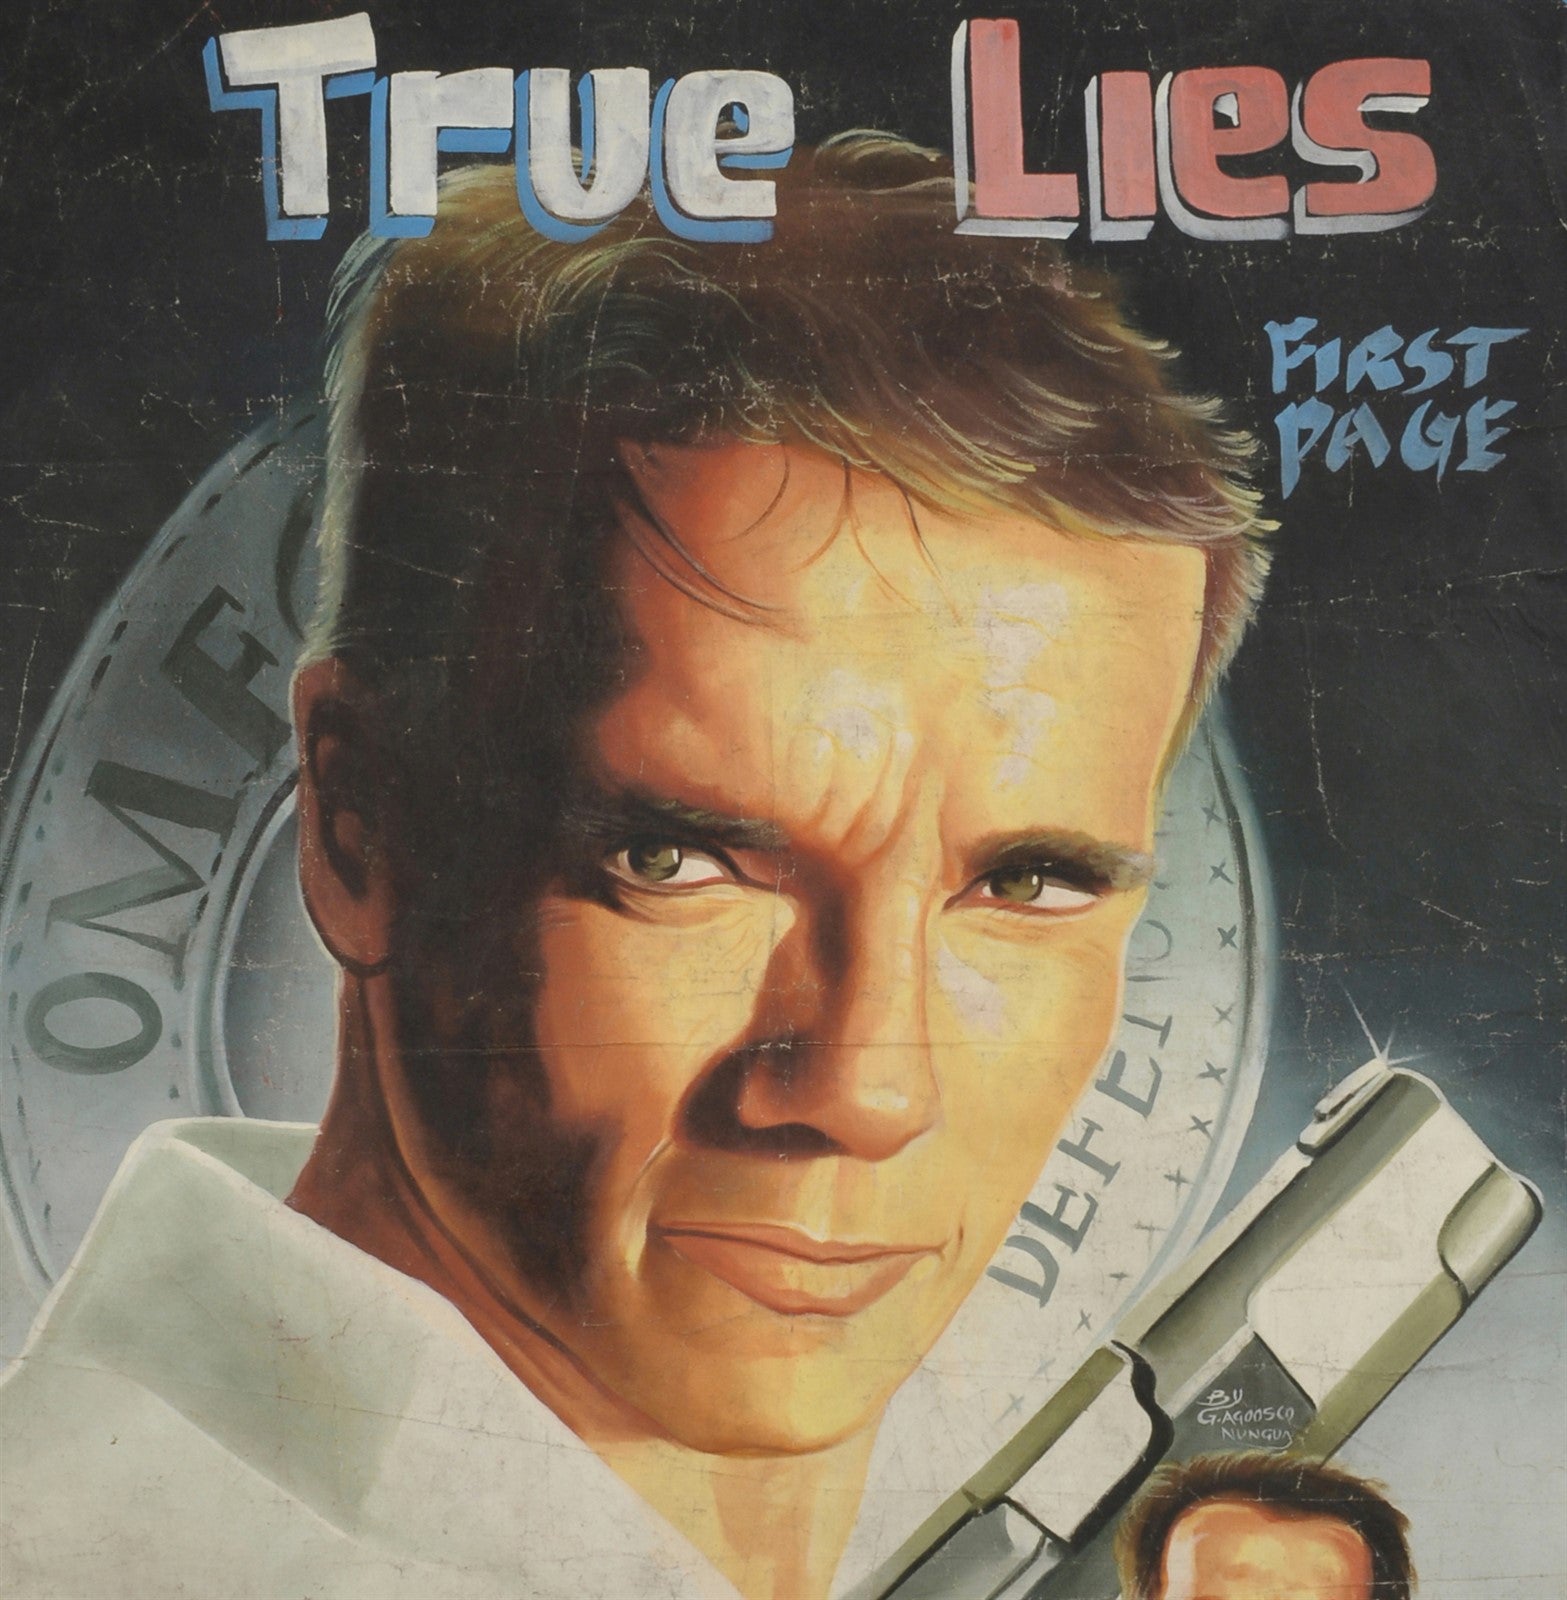 TRUE LIES MOVIE POSTER HAND PAINTED IN GHANA WEST AFRICA FOR THE LOCAL CINEMA DETAILS